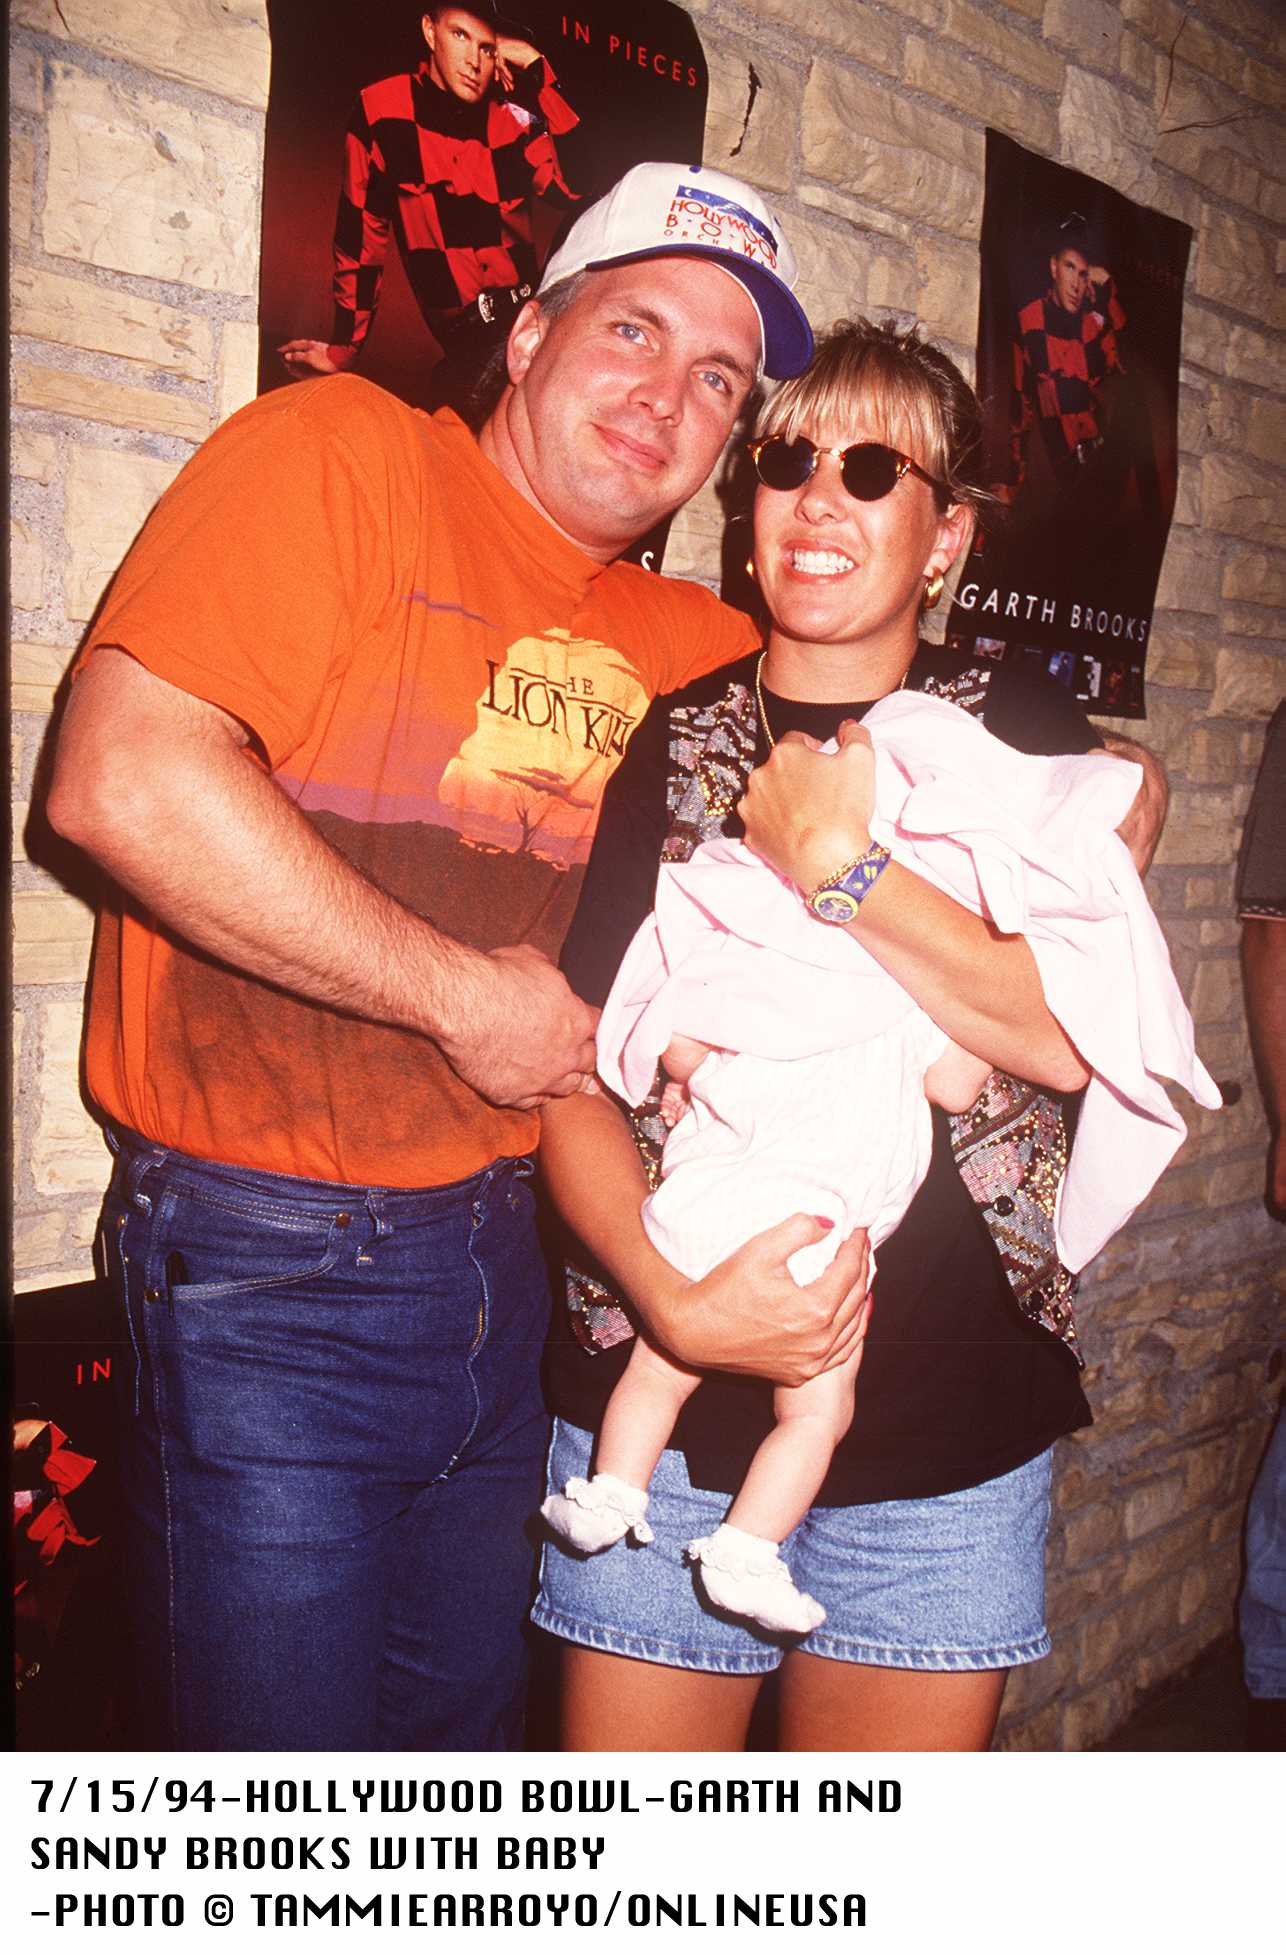 Garth Brooks and his wife Sandy Brooks with their baby at the Hollywood Bowl on July 15, 1994 | Source: Getty Images